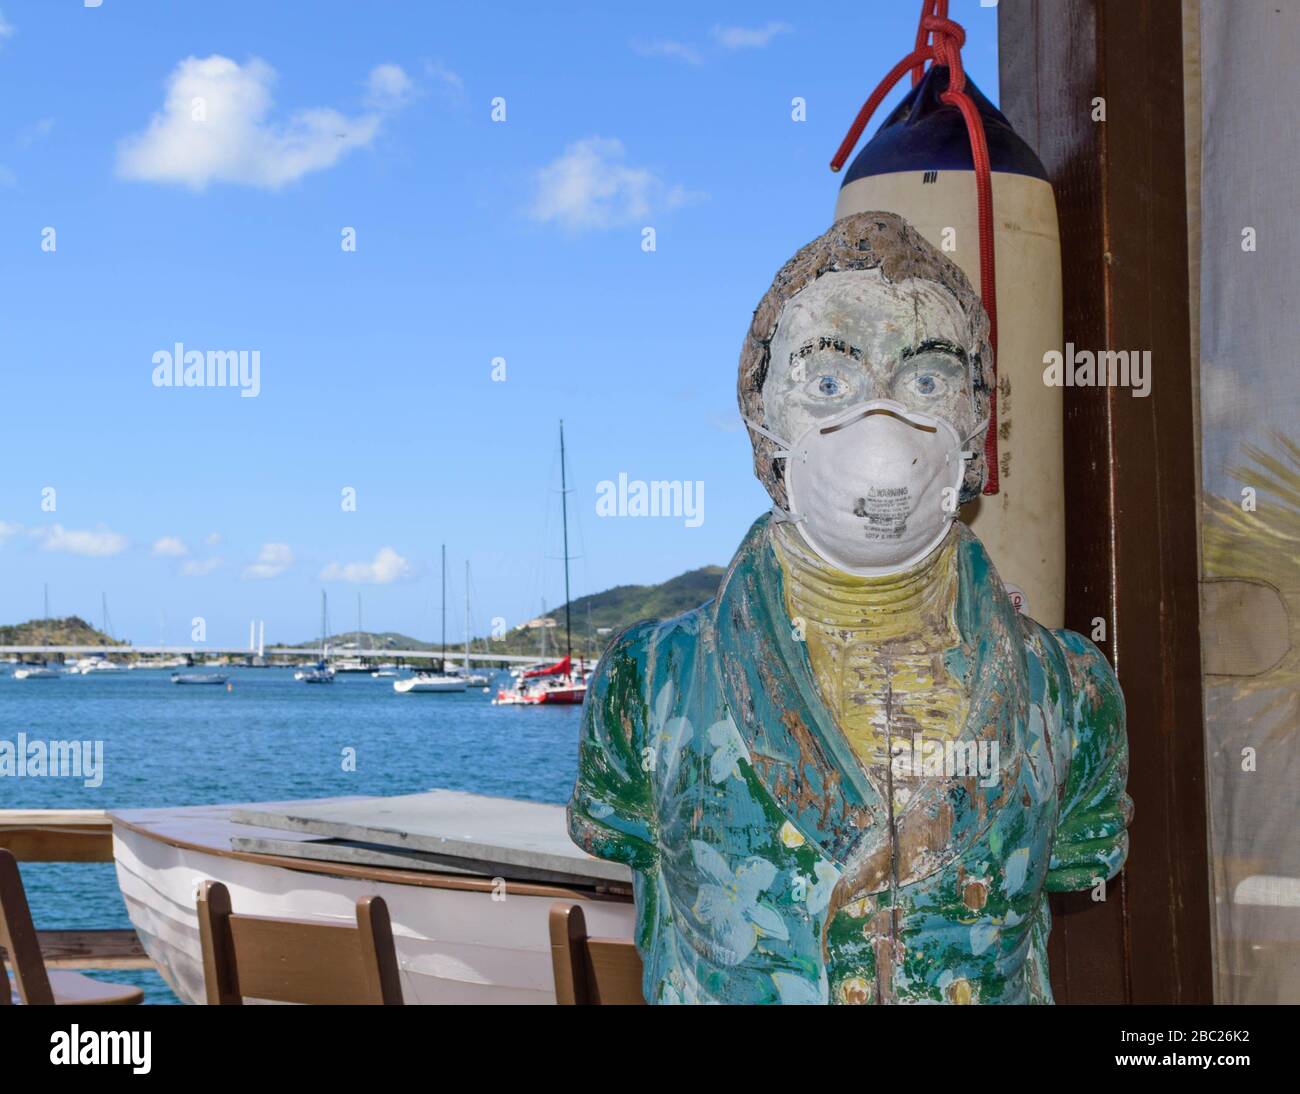 Bar mascot wears a (used) protective mask at this popular Caribbean bar and restaurant while it is closed for the Covid-19 Pandemic Stock Photo